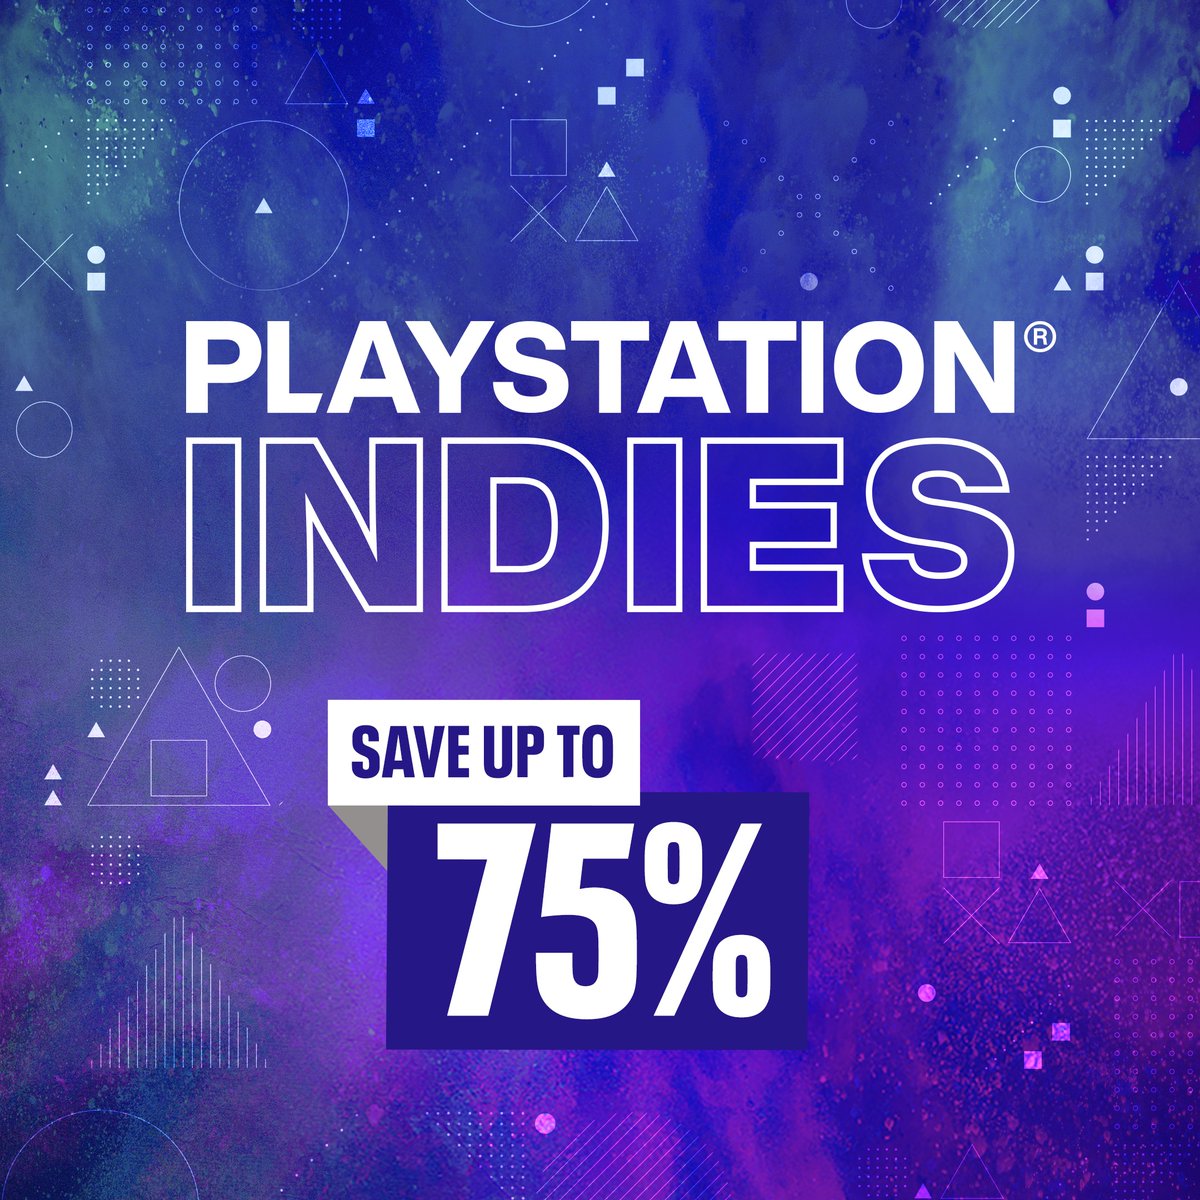 Playstation Save Big On Ps4 Hits Including Amnesia Collection Octodad Dadliest Catch Tetris Effect Abzu Inside Furi Definitive Edition And More In The Playstation Indies Sale T Co Azrnszlwqp T Co Yjmorpmwoc